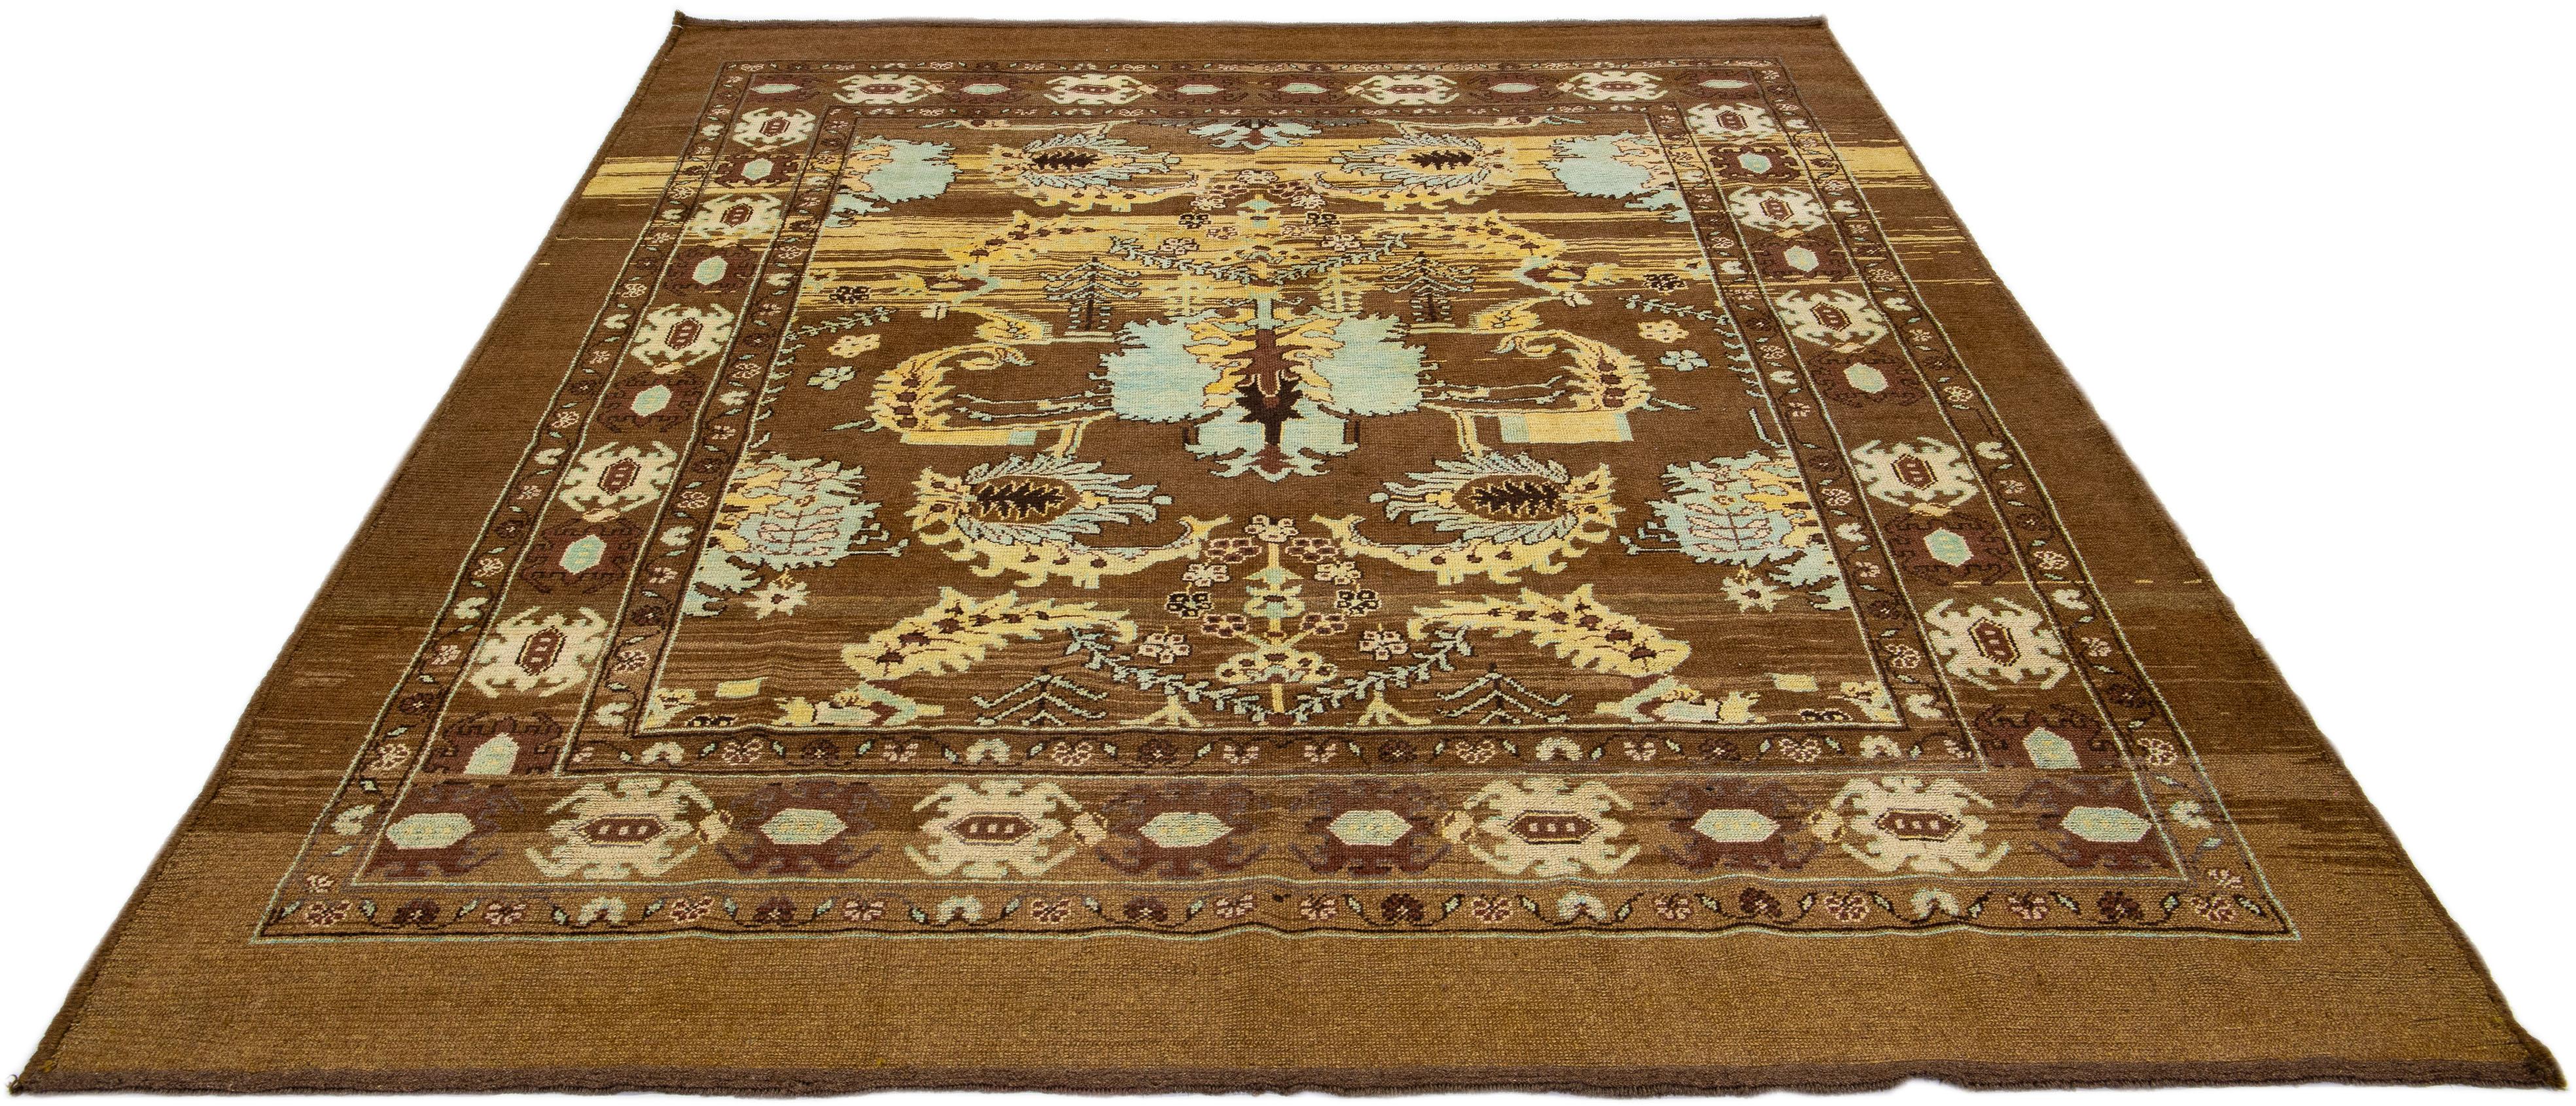 Modern Mid-Centruy Transitional Style Handmade Floral Brown Wool Rug by Apadana For Sale